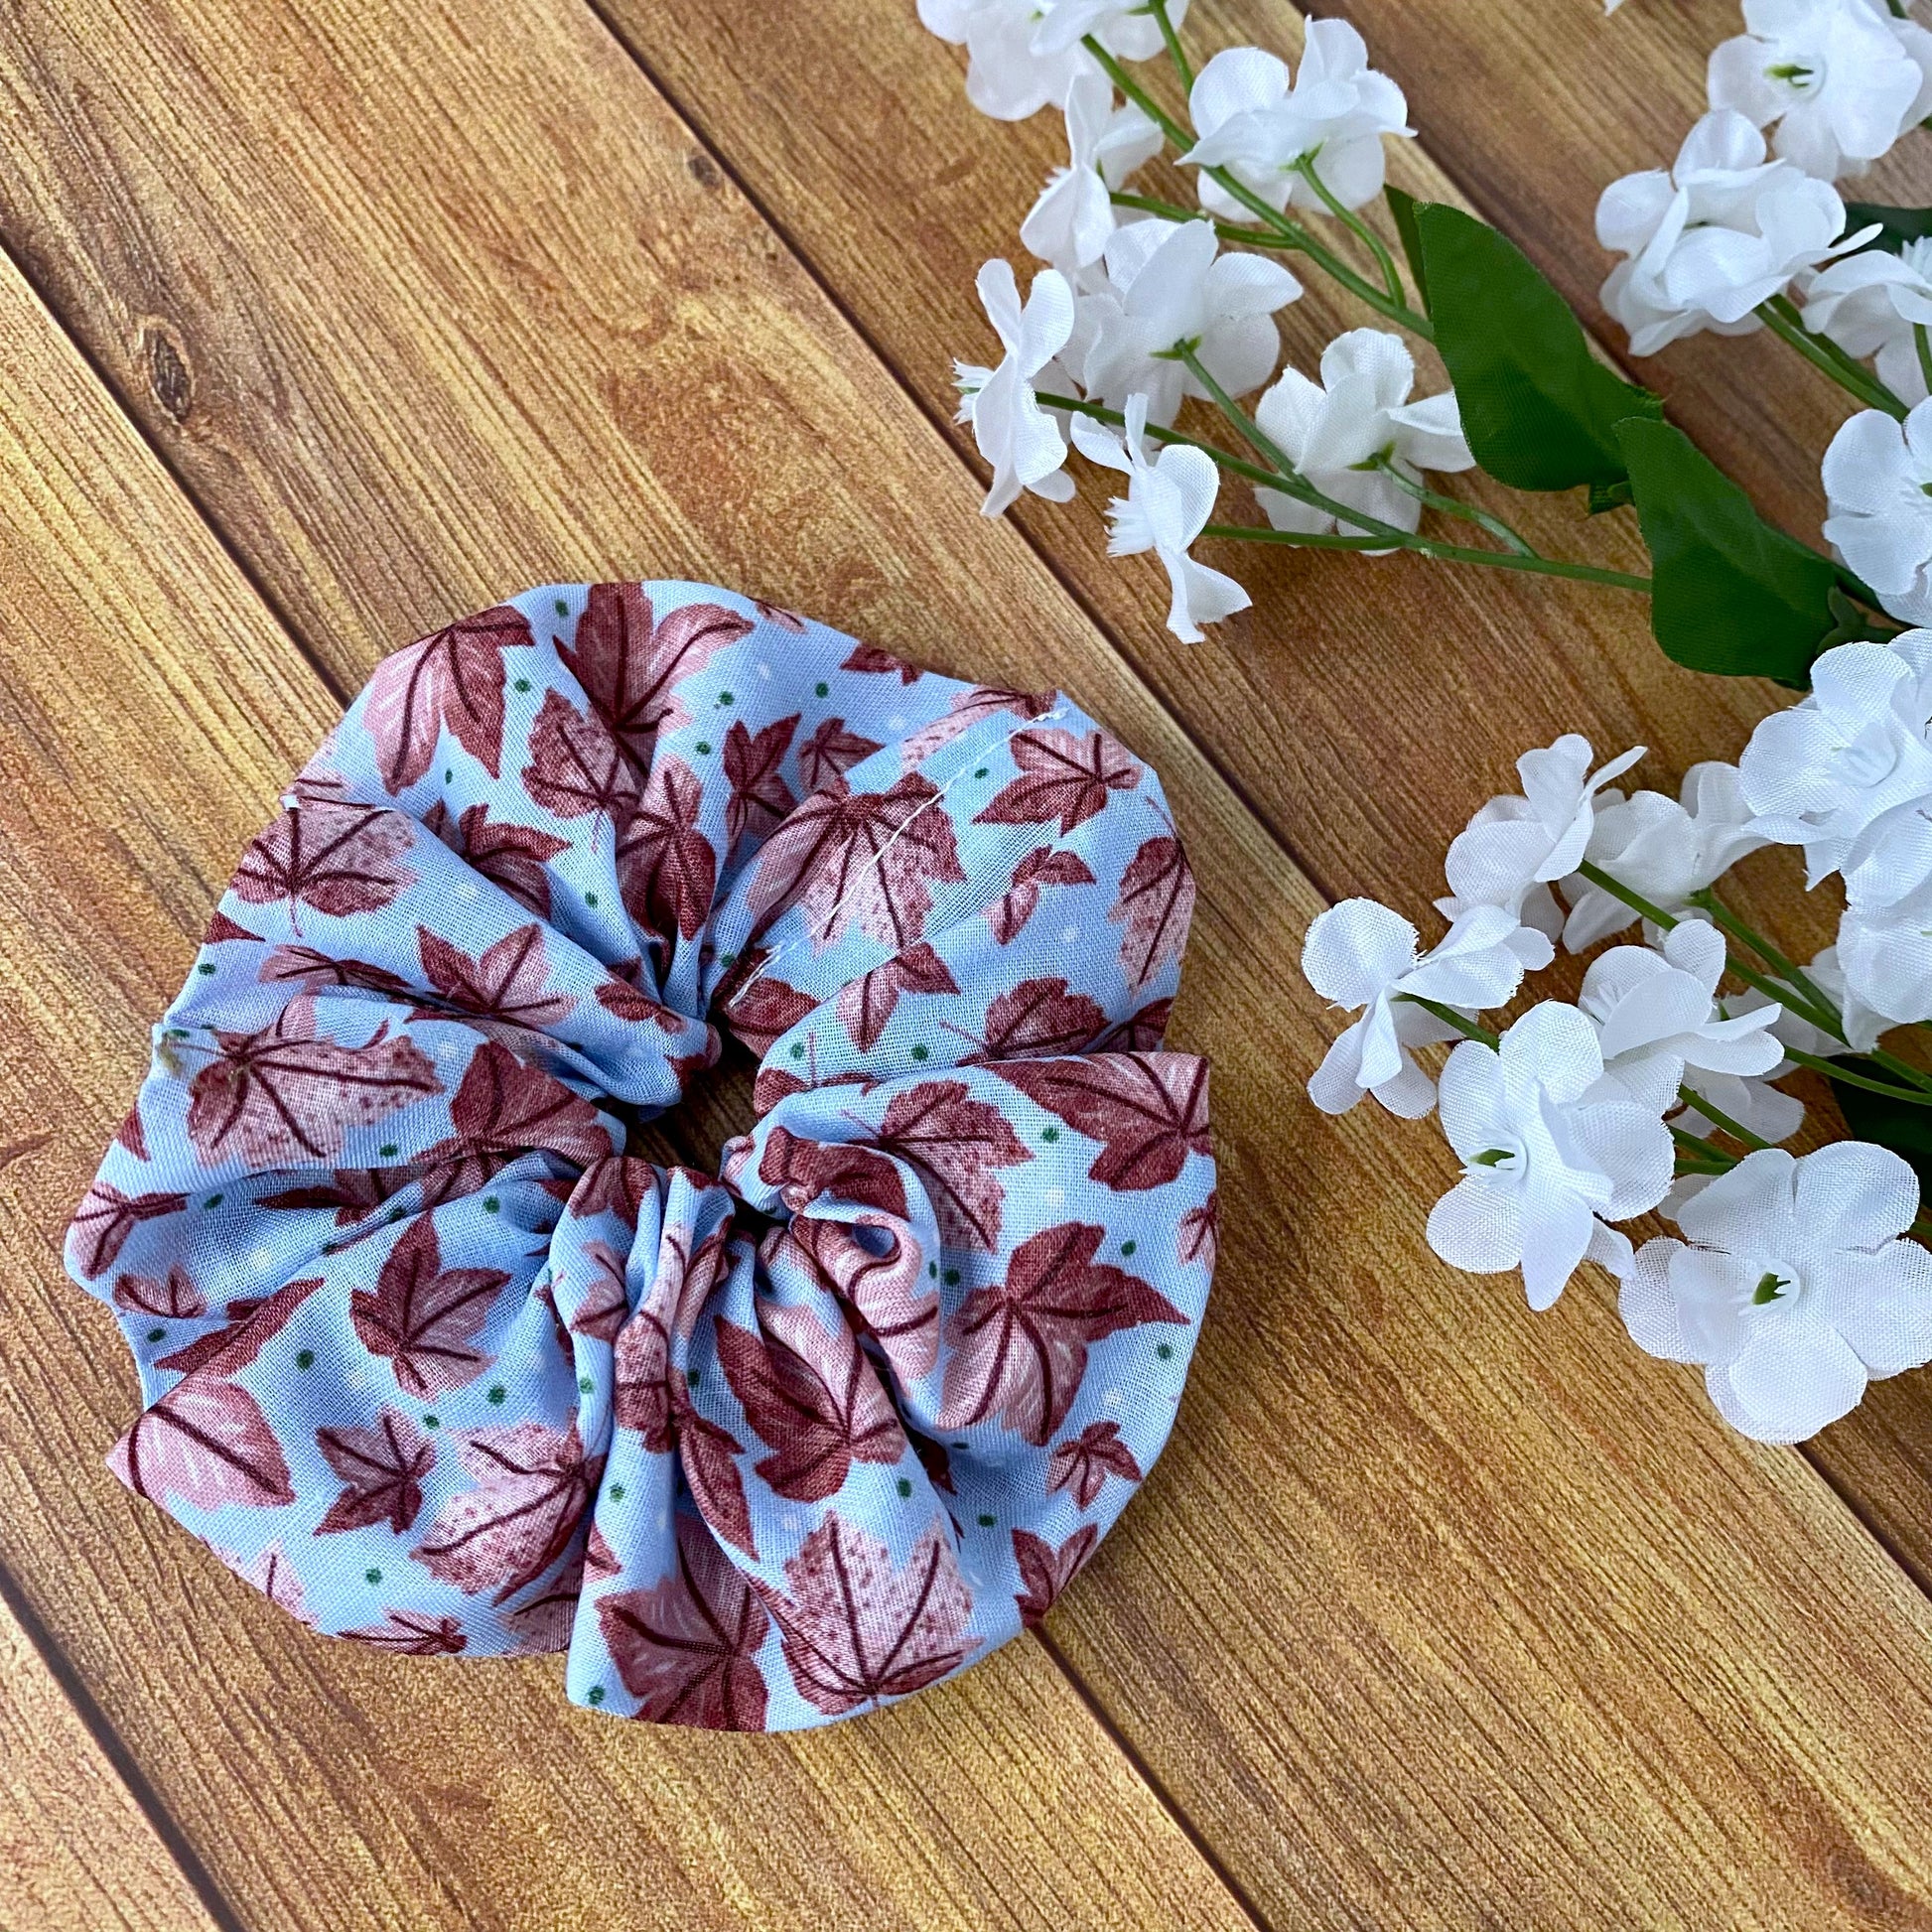 pink leafy patterned scrunchie on wooden background with flowers around it